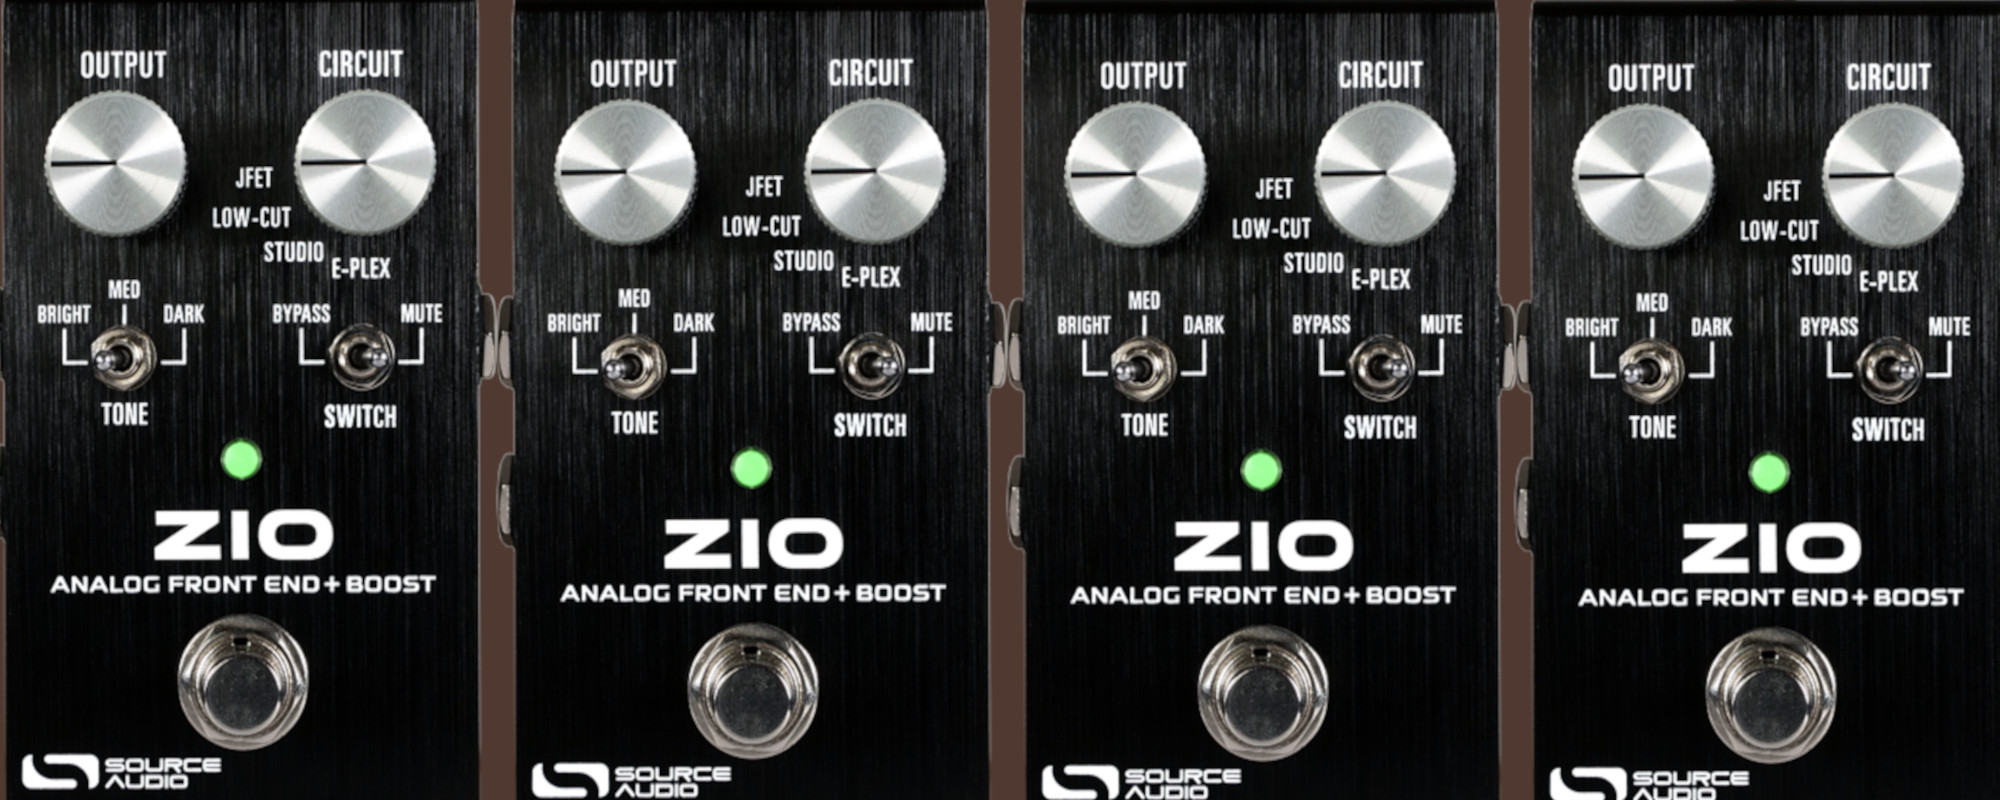 Gear Review: Source Audio Zio Analog Front End + Boost Pedal￼